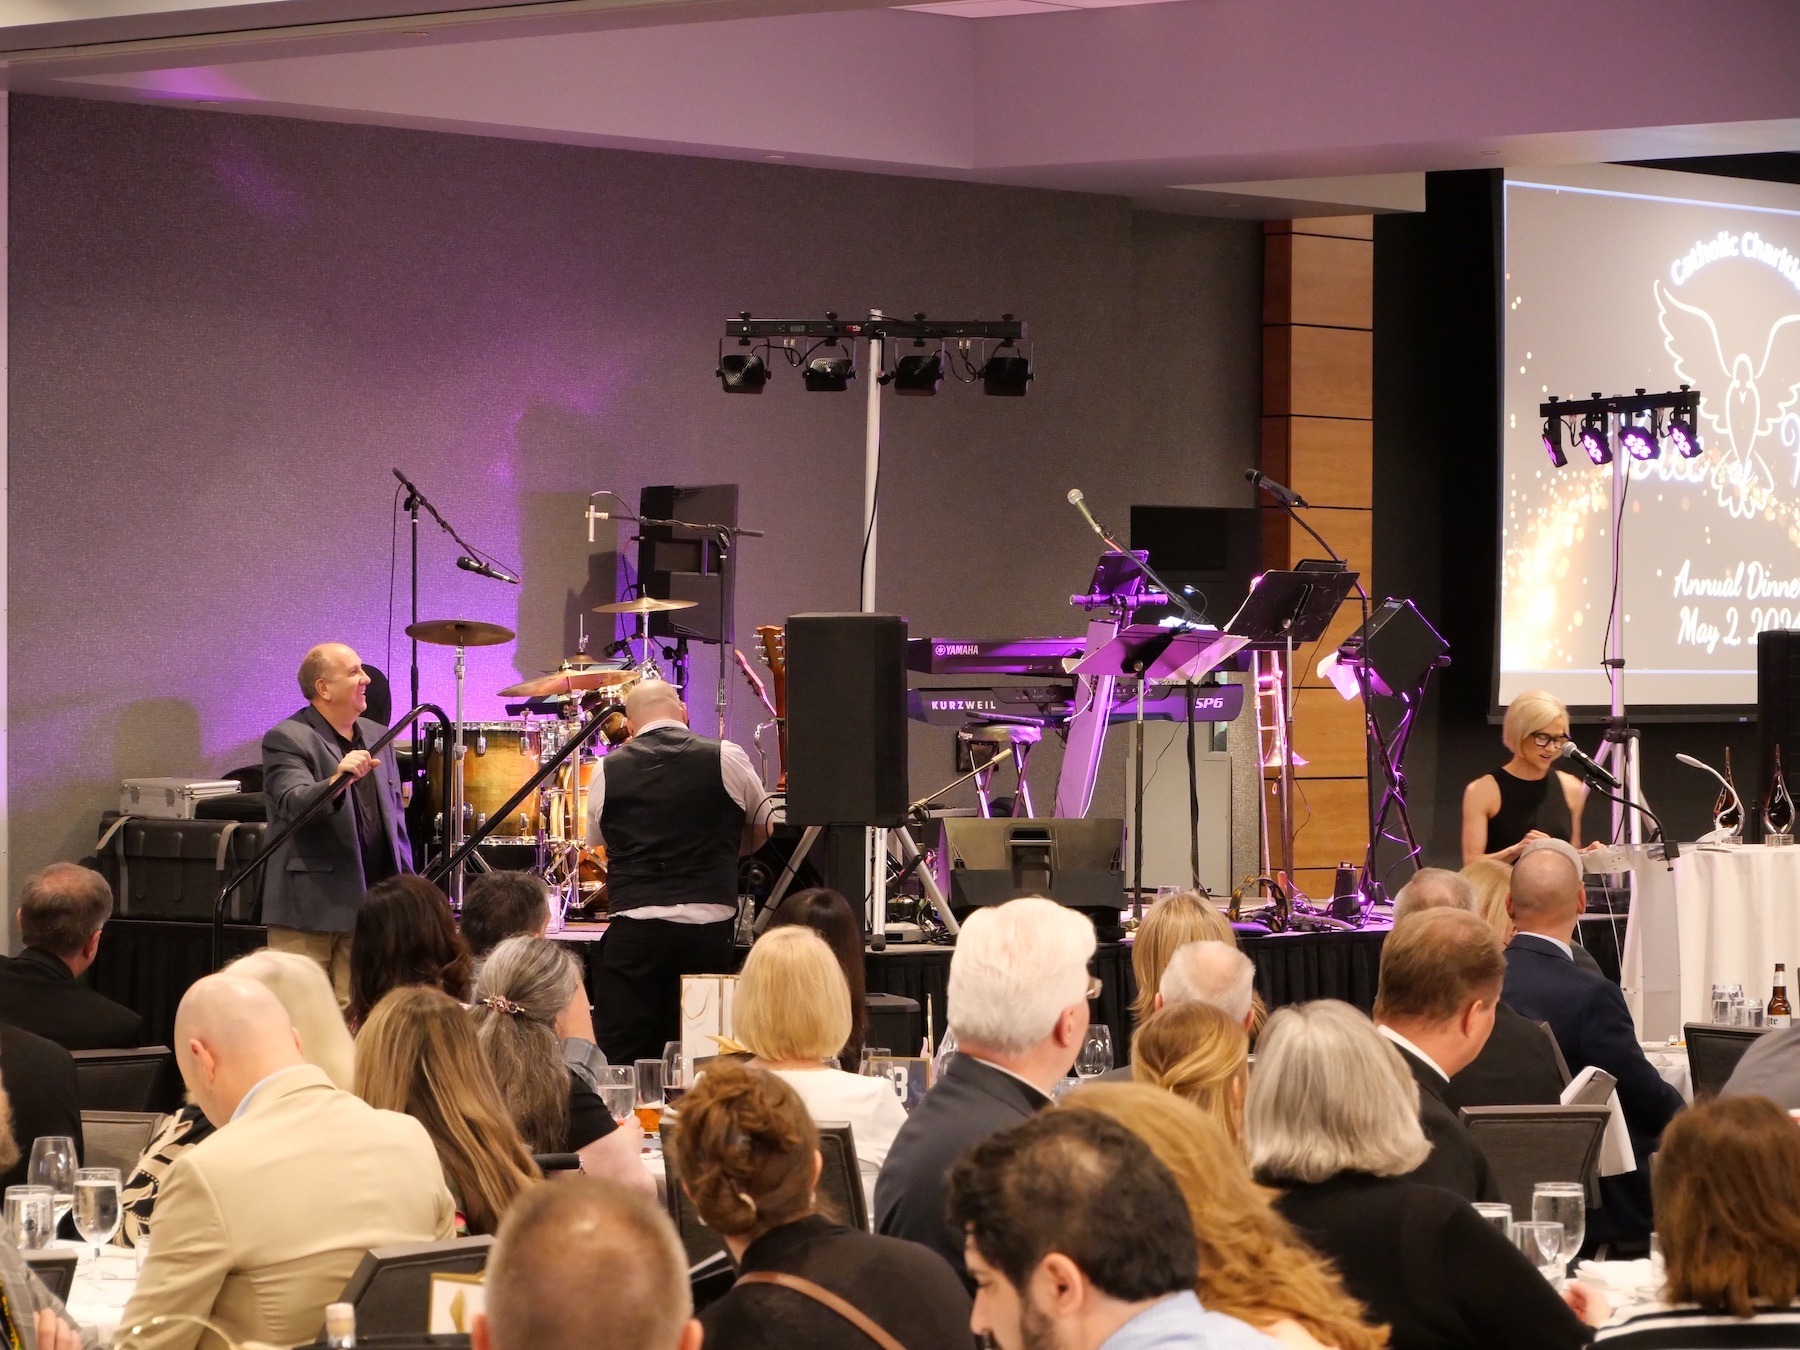 Image of the crowd and band at the Voice of Hope Dinner.